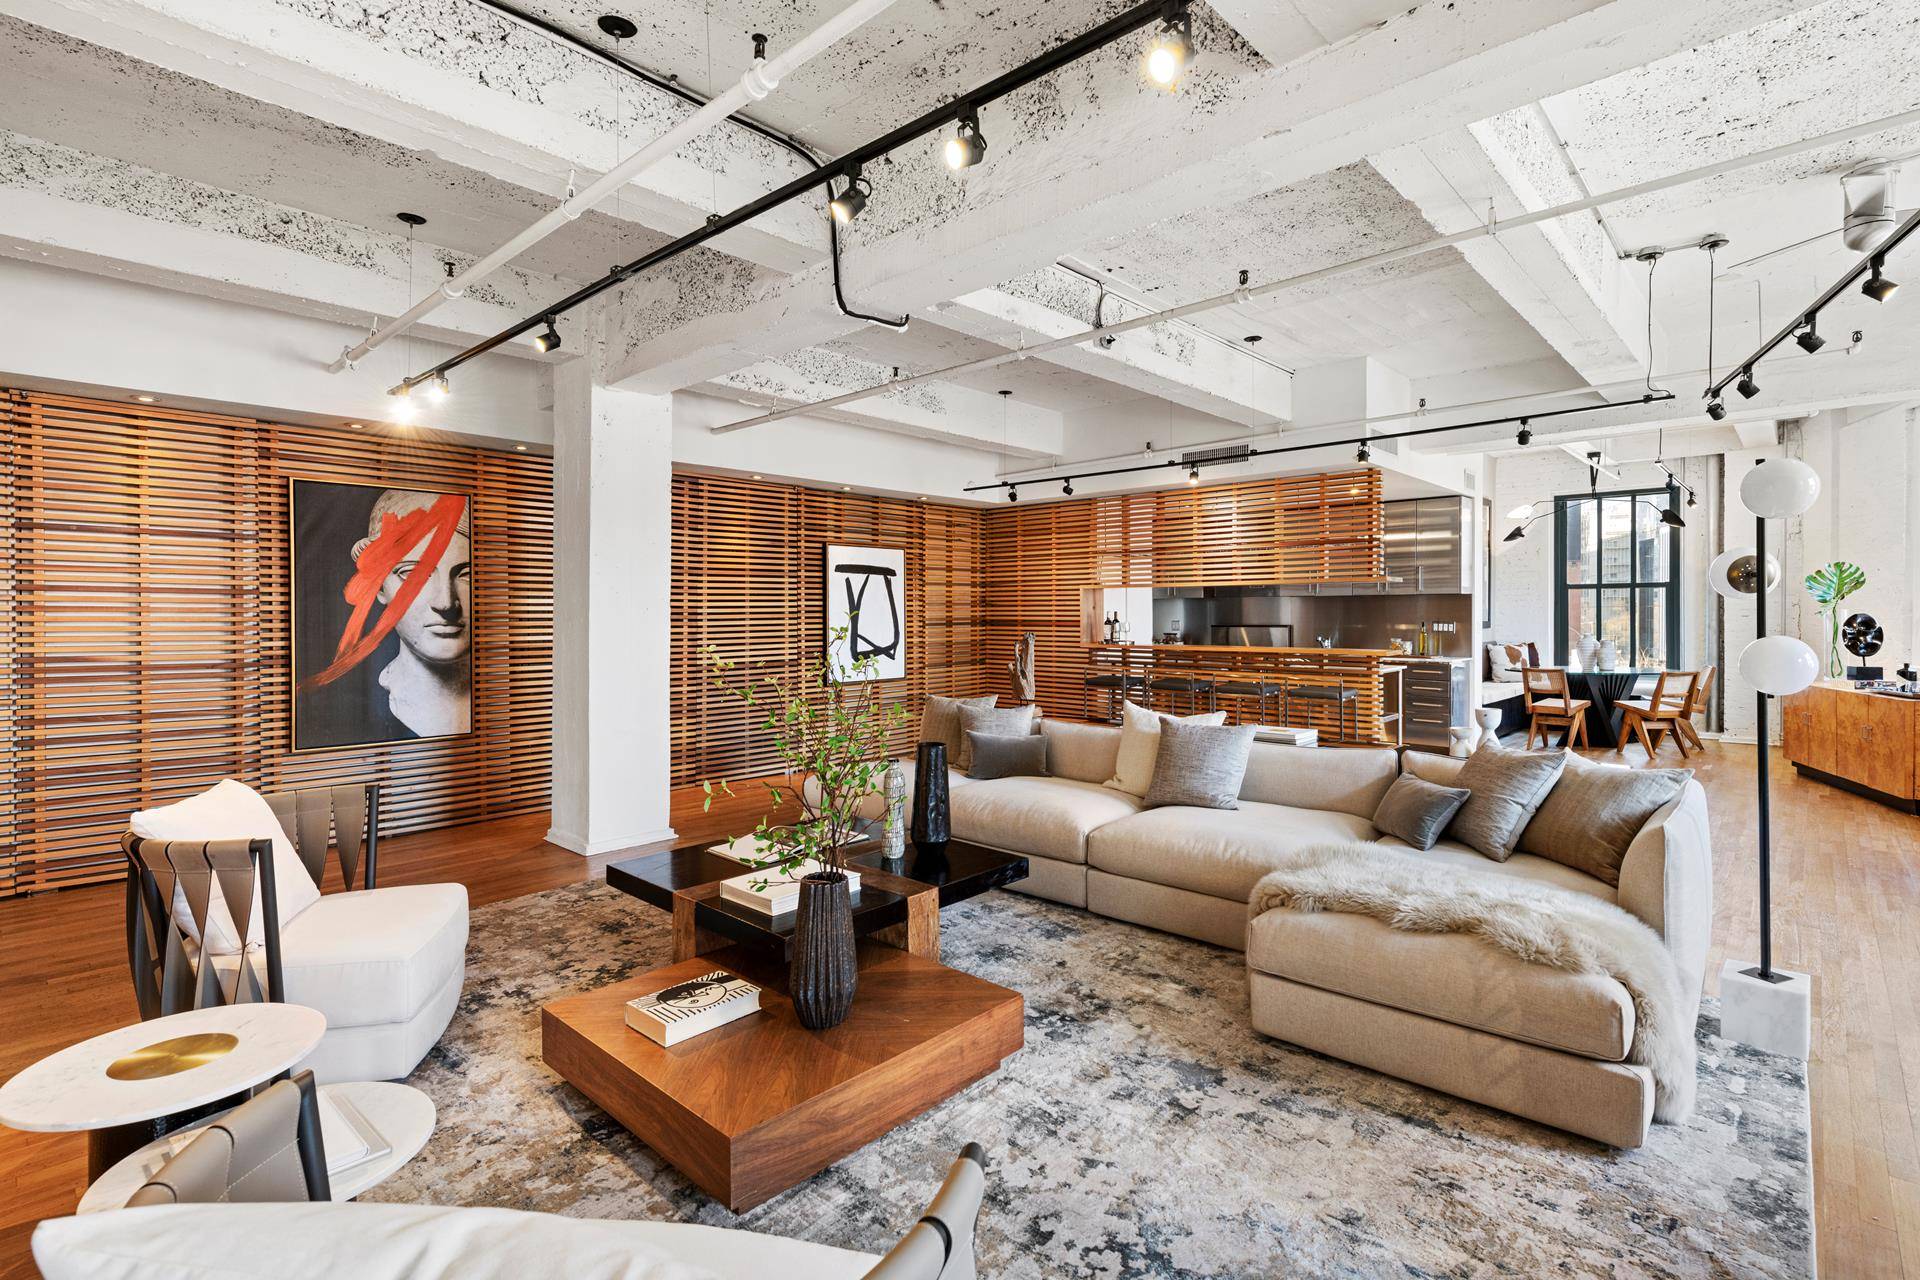 With over 70 feet of eastern frontage overlooking Cooper Square, this 2, 571SF loft offers pre war charm with industrial character in prime Noho.